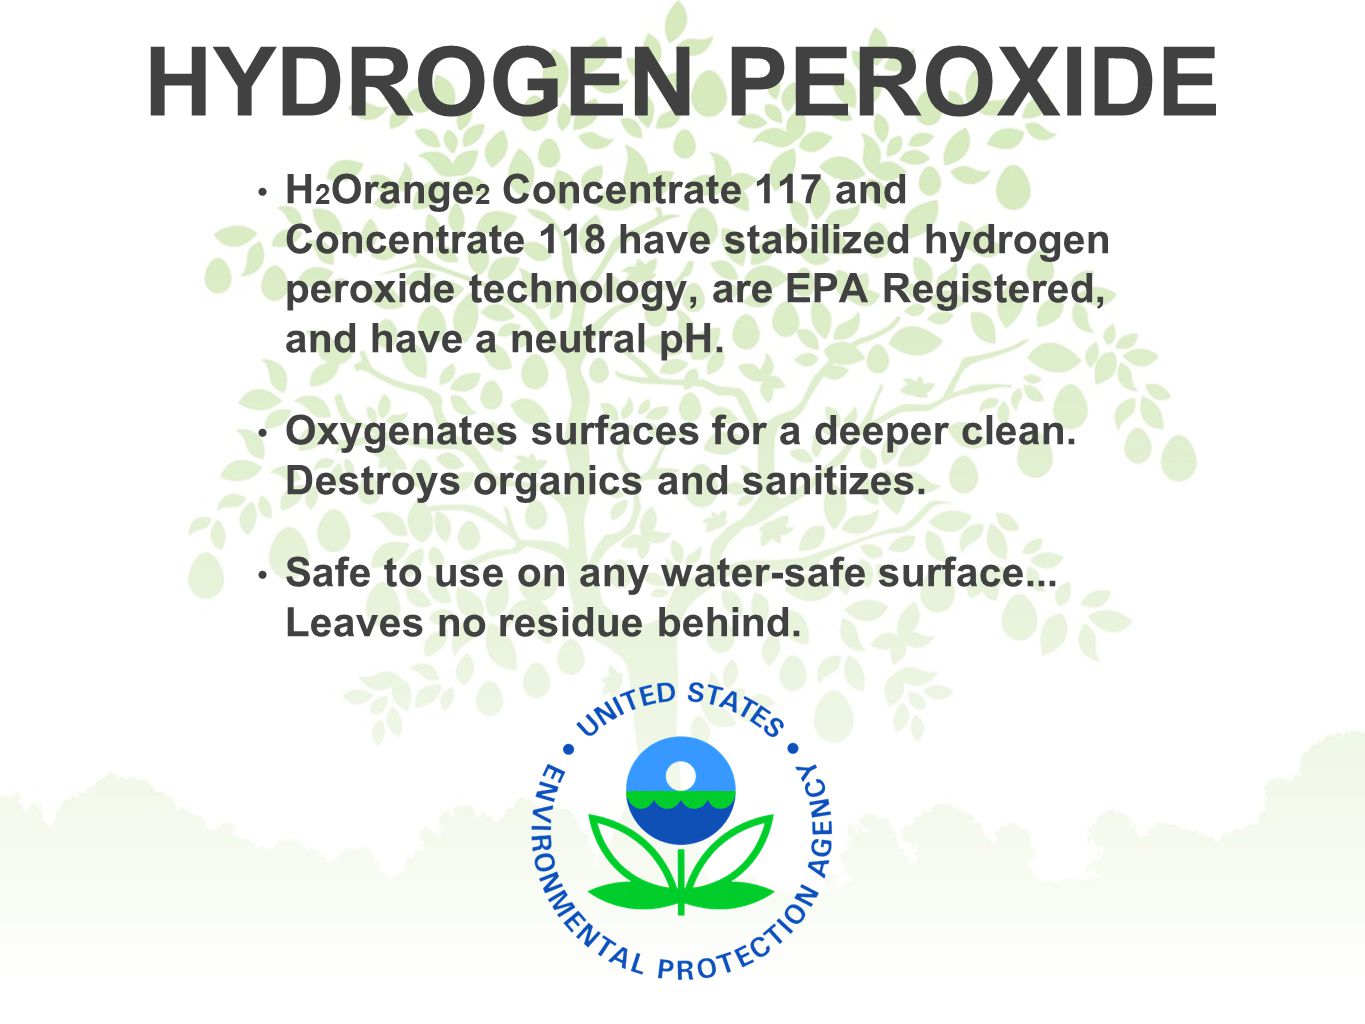 HYDROGEN PEROXIDE H 2 Orange 2 Concentrate 117 and Concentrate 118 have stabilized hydrogen peroxide technology, are EPA Registered, and have a neutral pH.